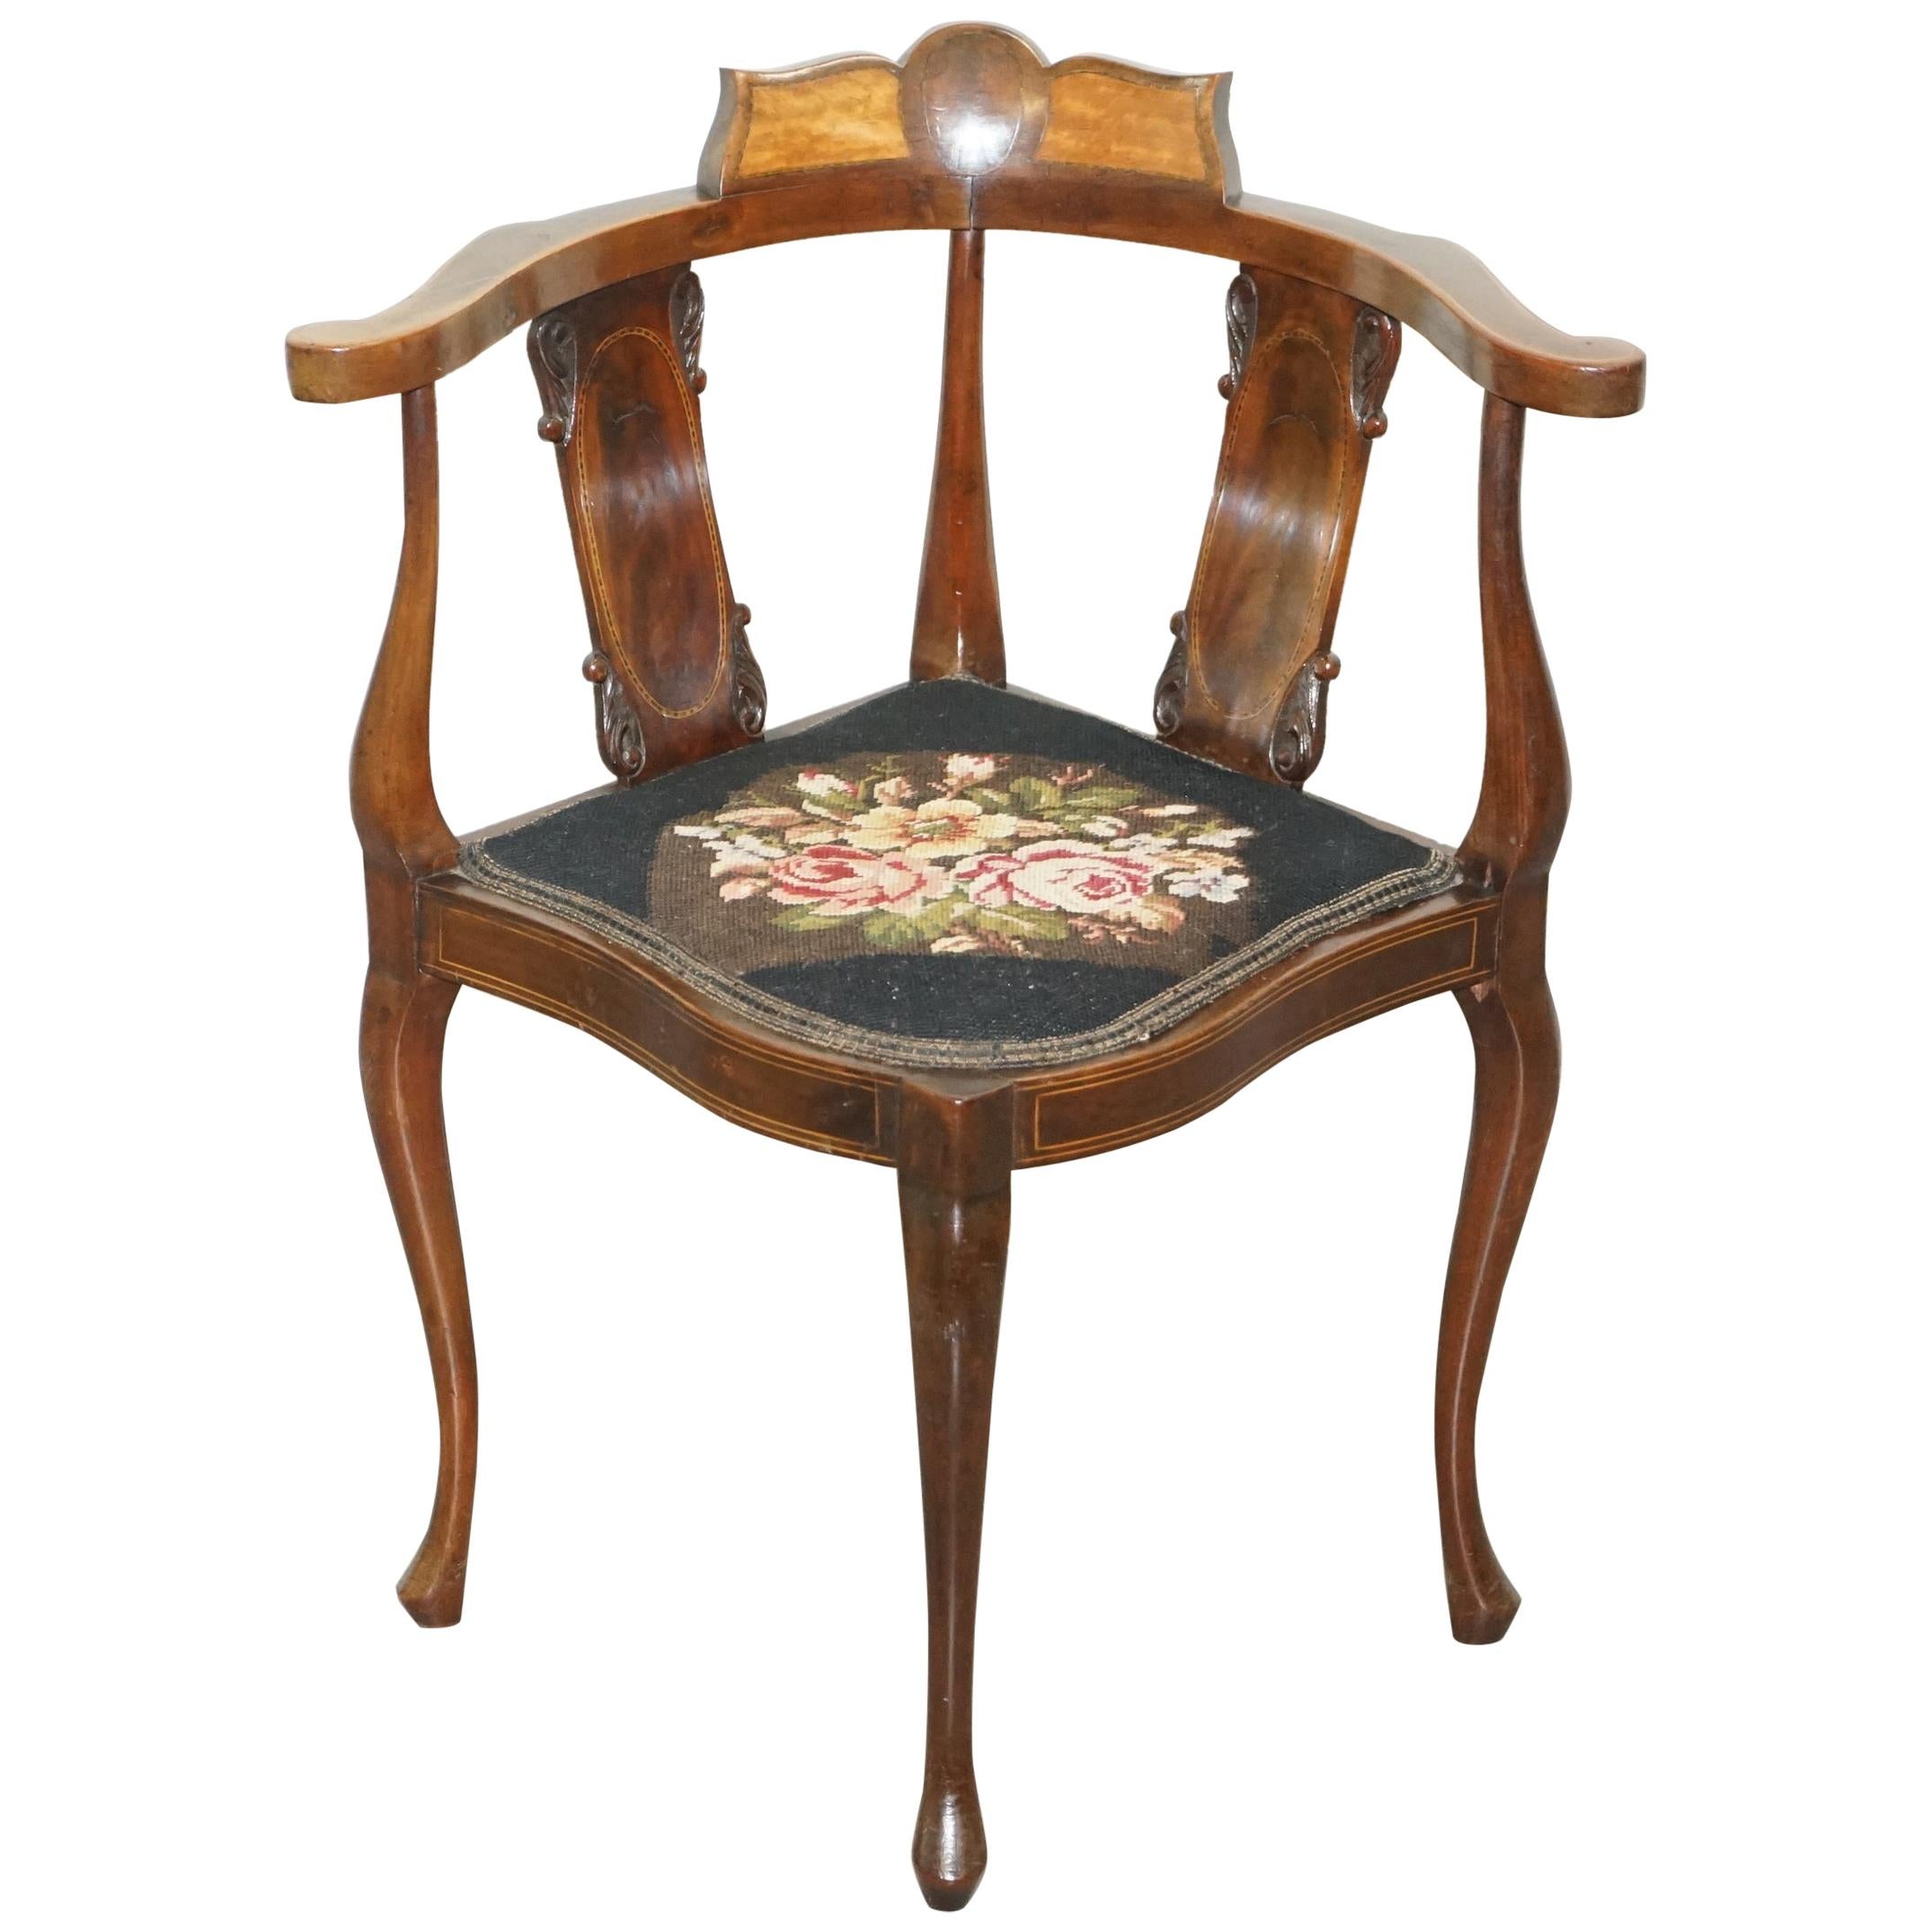 Beautifully Inlaid Sheraton Revival Victorian Corner Chair, Sublime Quality